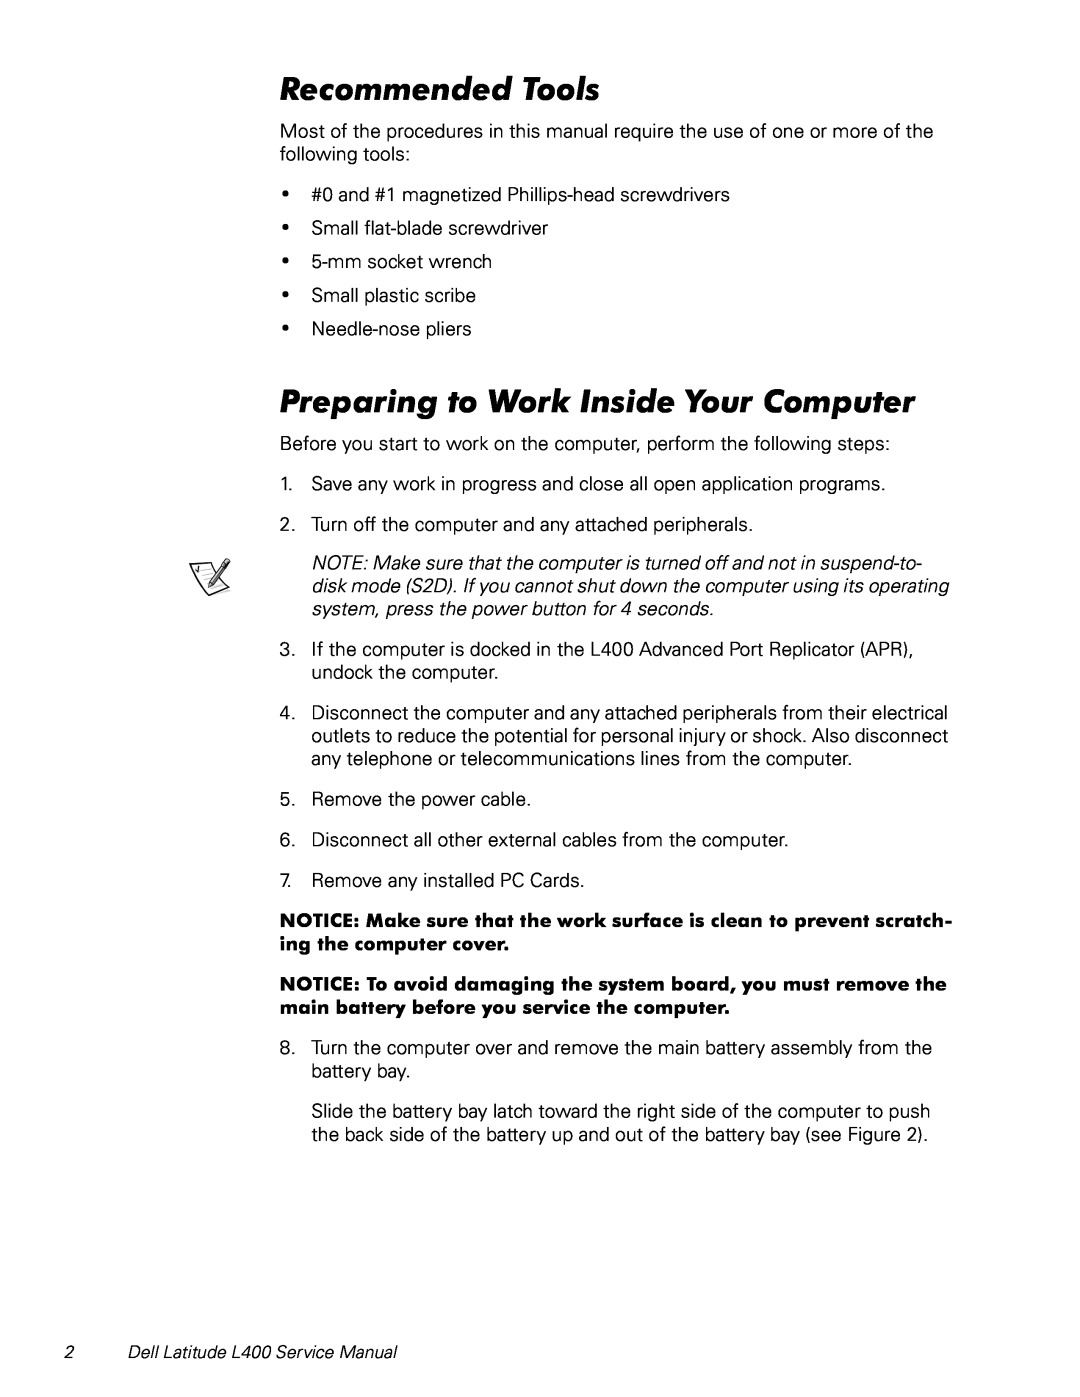 Dell L400 service manual Recommended Tools, Preparing to Work Inside Your Computer 